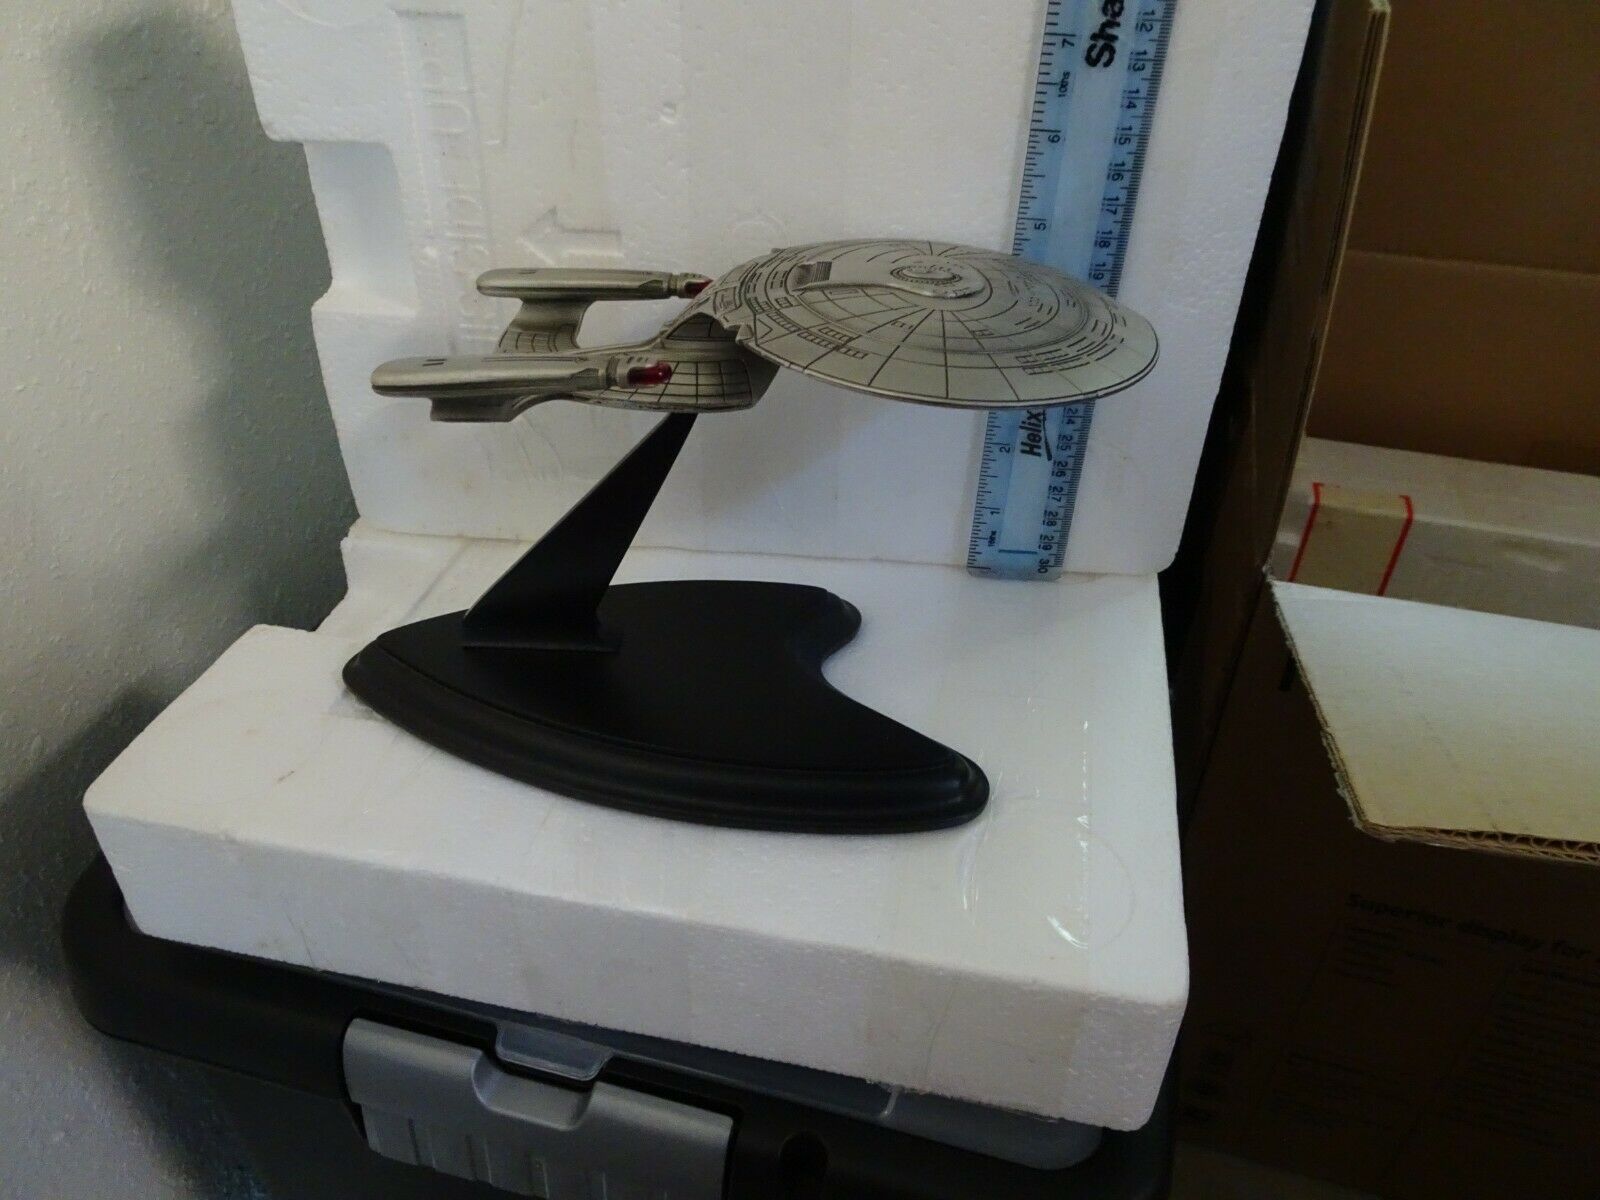 Star Trek Enterprise Ncc - 1701d Pewter Statue With Stand From The Franklin Mint